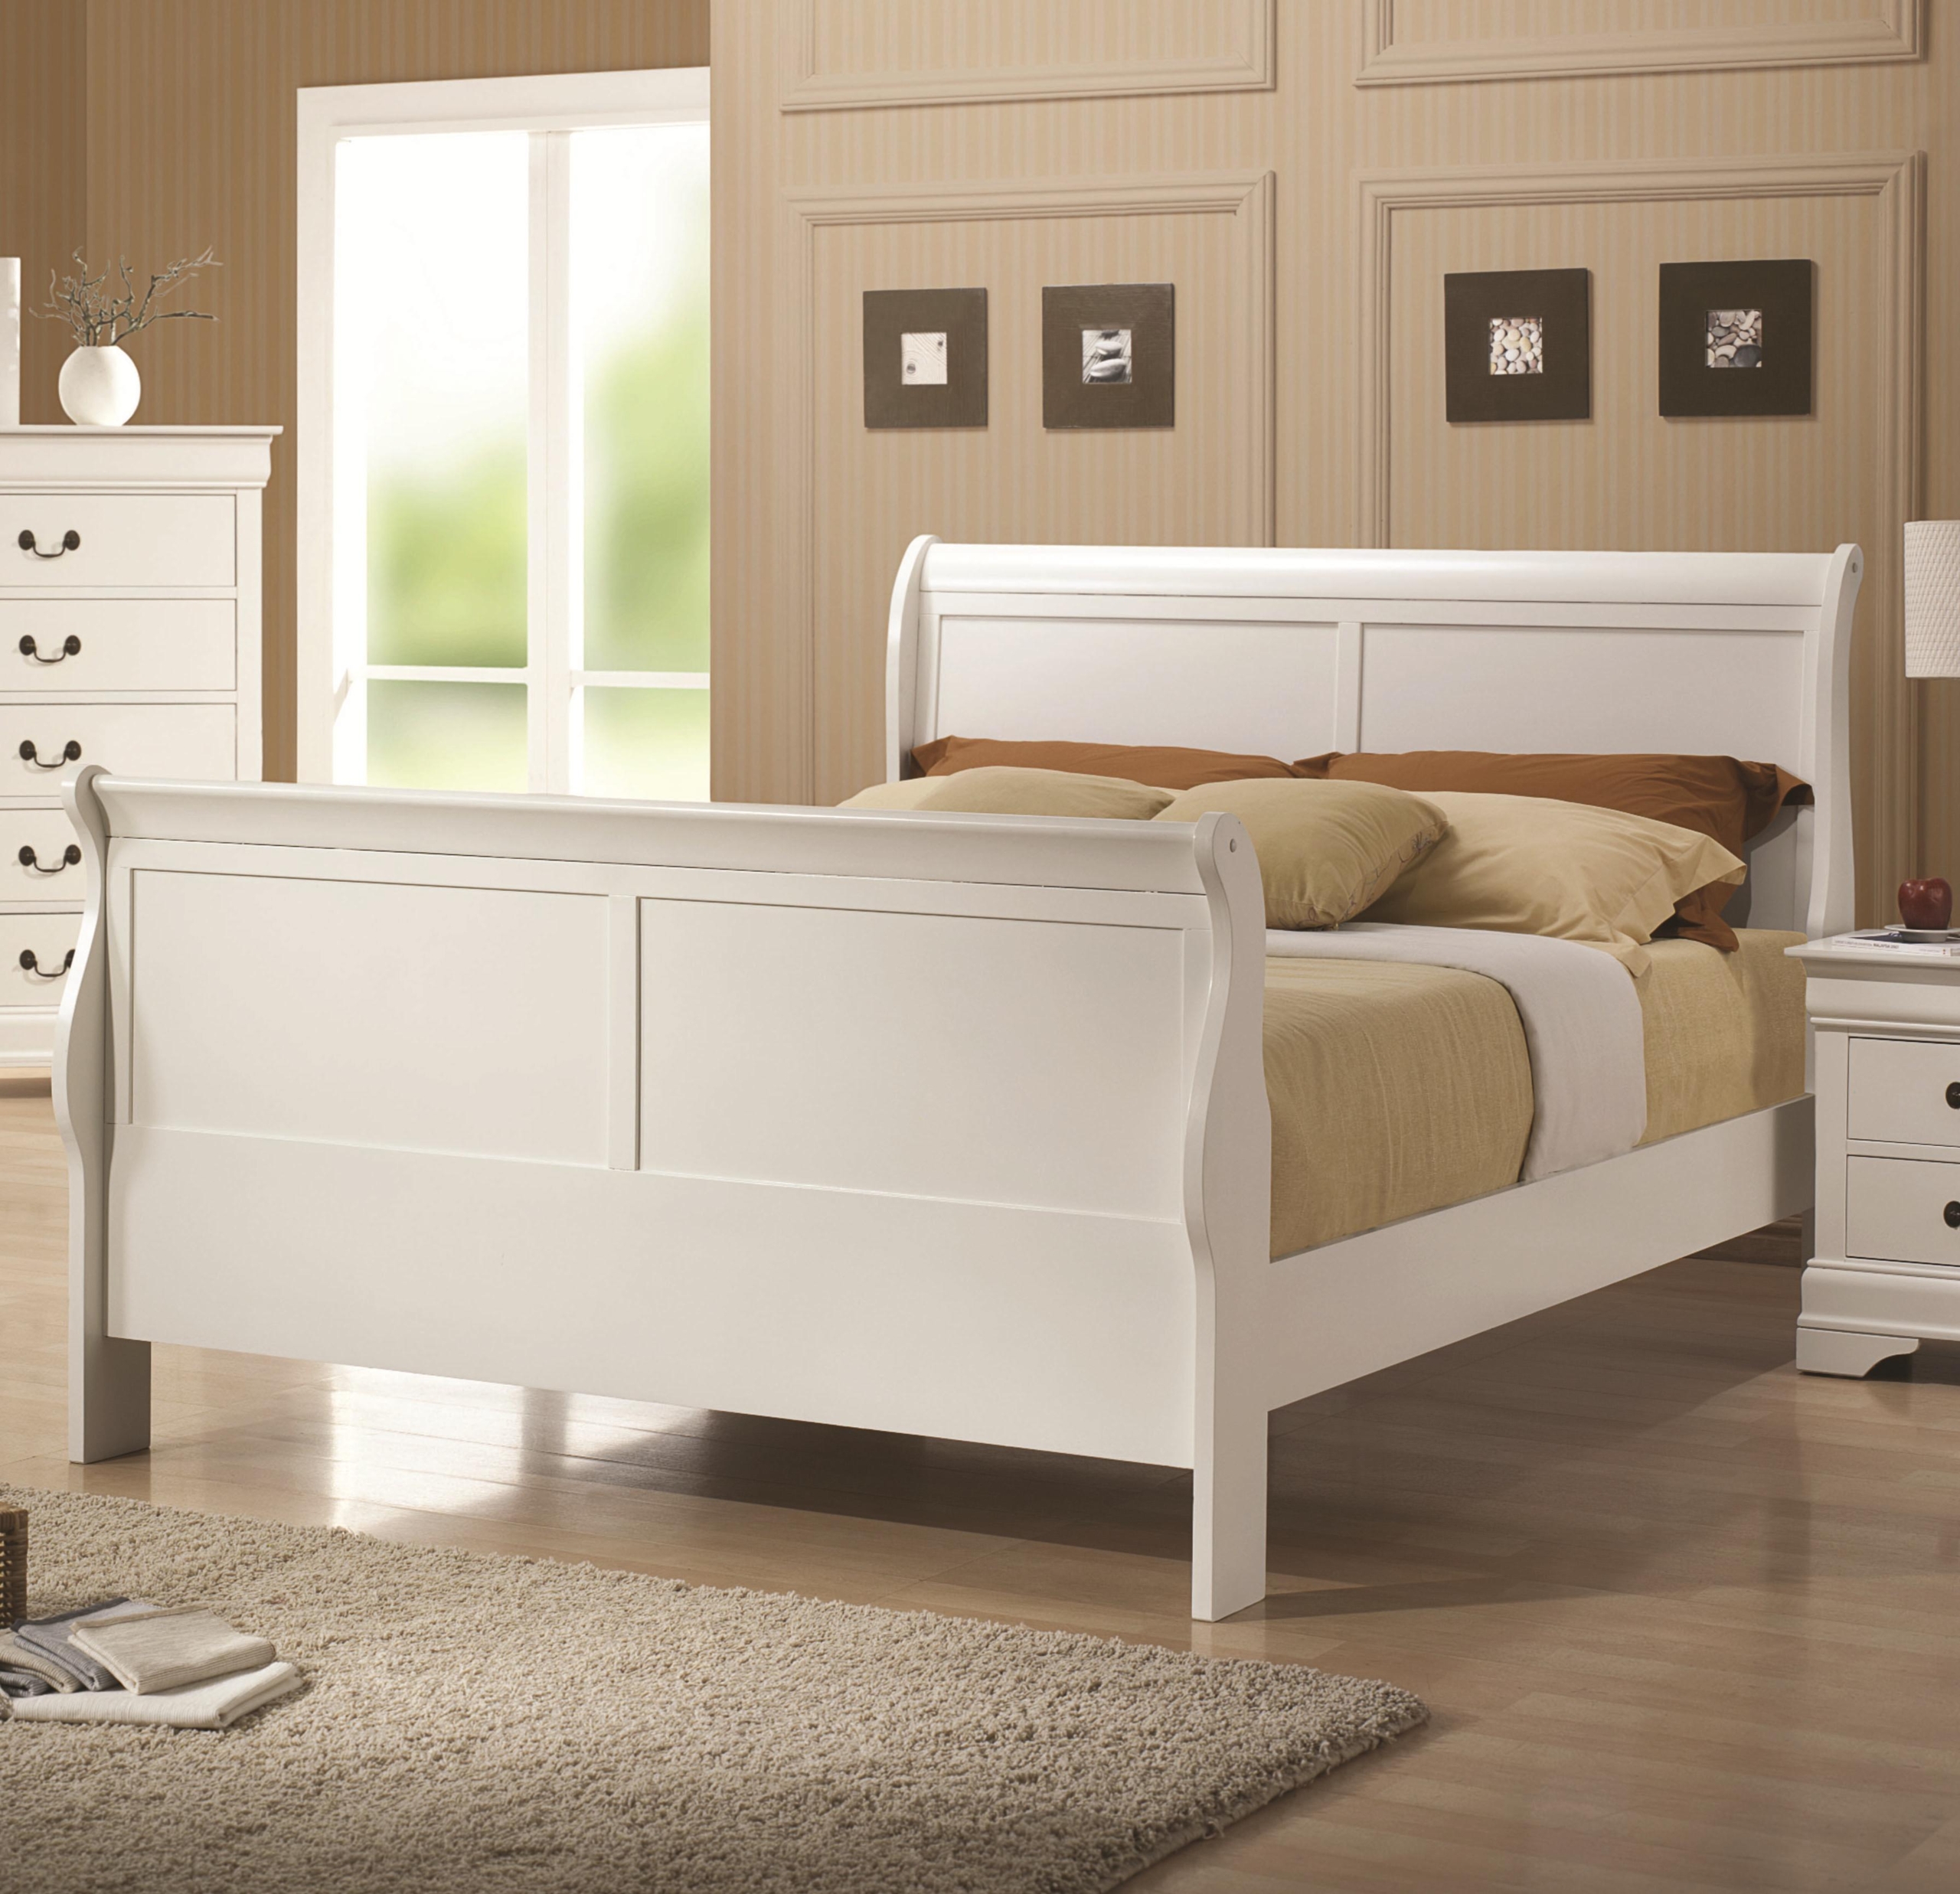 Louis philippe sleigh bed 6